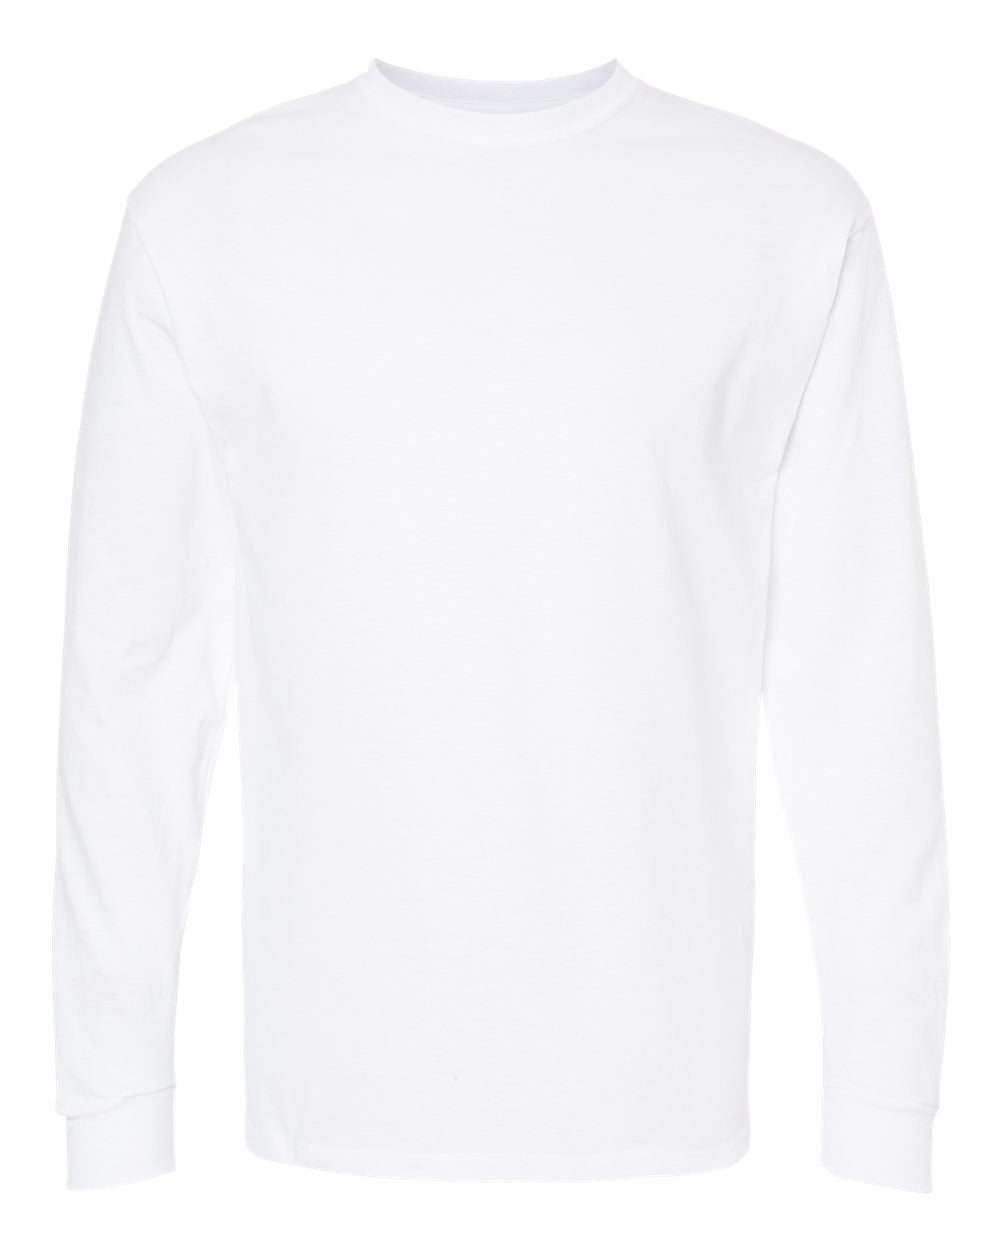 M&O Gold Soft Touch Long Sleeve T-Shirt 4820 #color_White